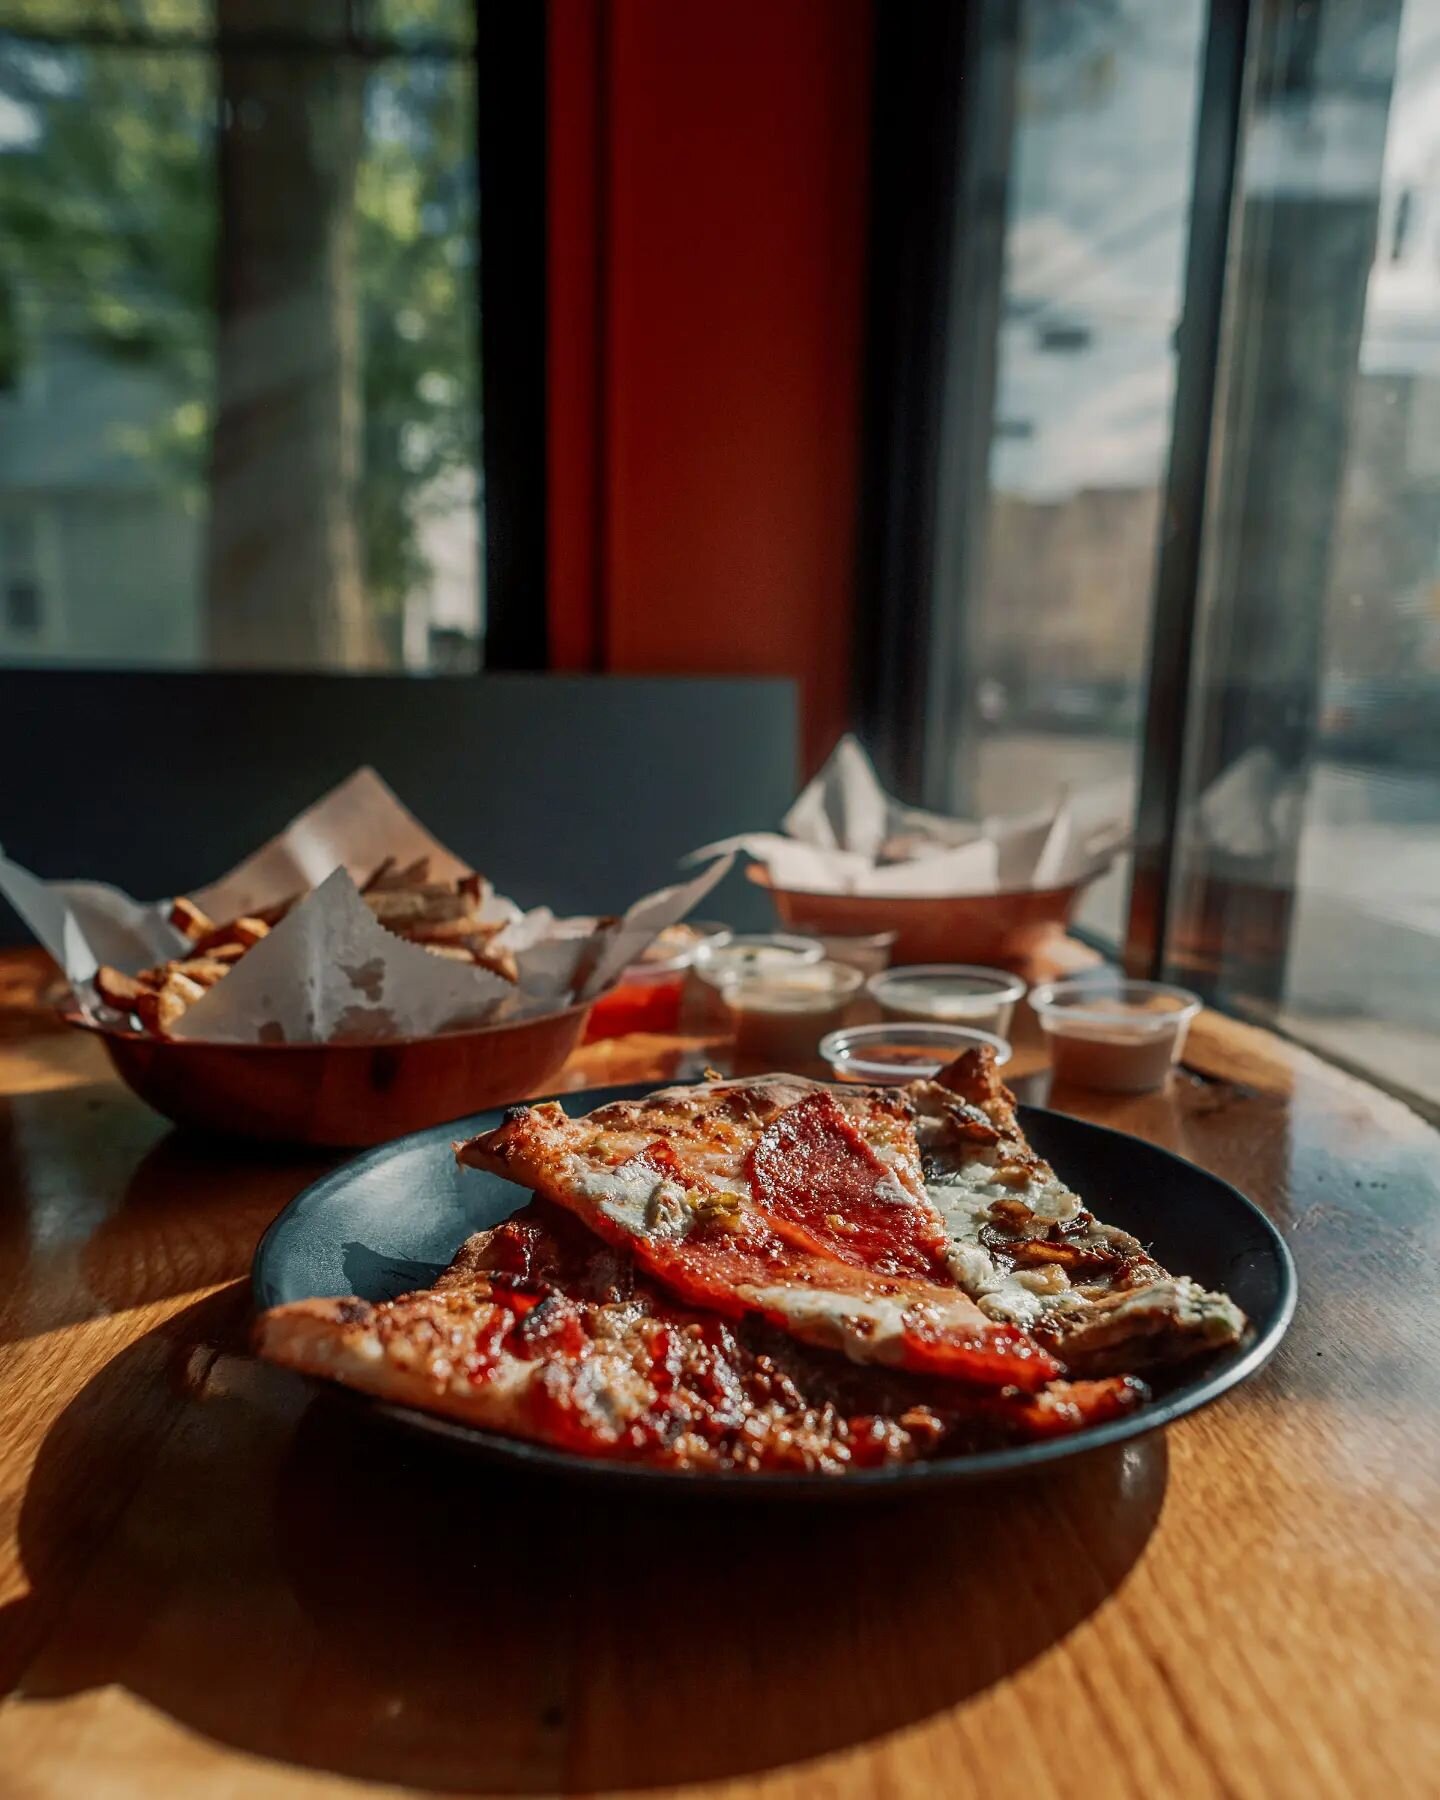 what a view 🤩
.
.
.
#pizzaislove #newhavenpizza #frieslover #pizzapizzapizza #ctpizza #ctpizzarestaurants #one6three #pizzaisbae #pizzagram #nhv #nhveats #connecticutfoodie #newhavenfood